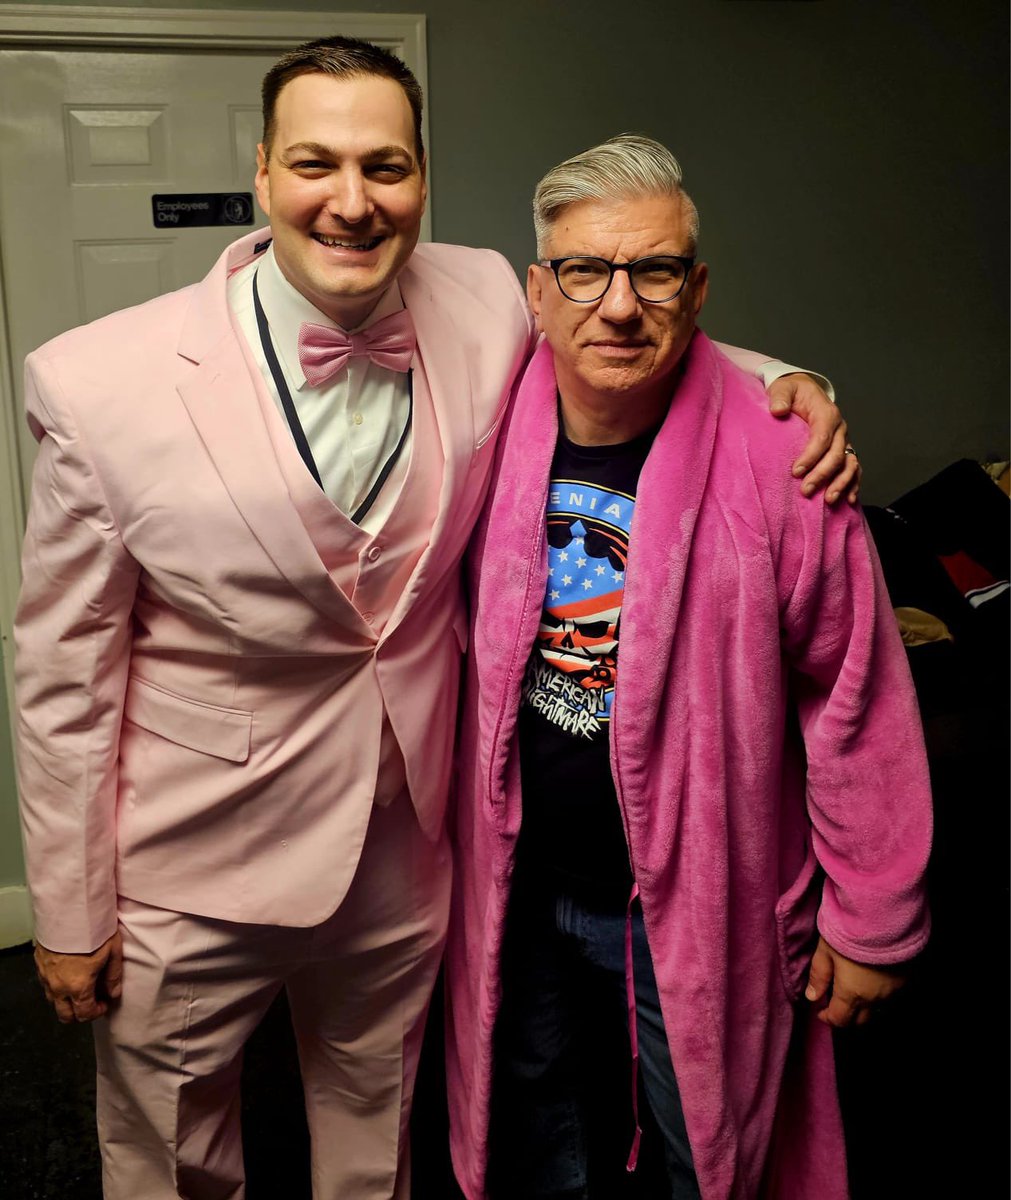 Happy 15th anniversary to #BustedOpen15 and the guy who made it all possible! @davidlagreca1 - who makes Pink, and everything else he does, THE BEST!